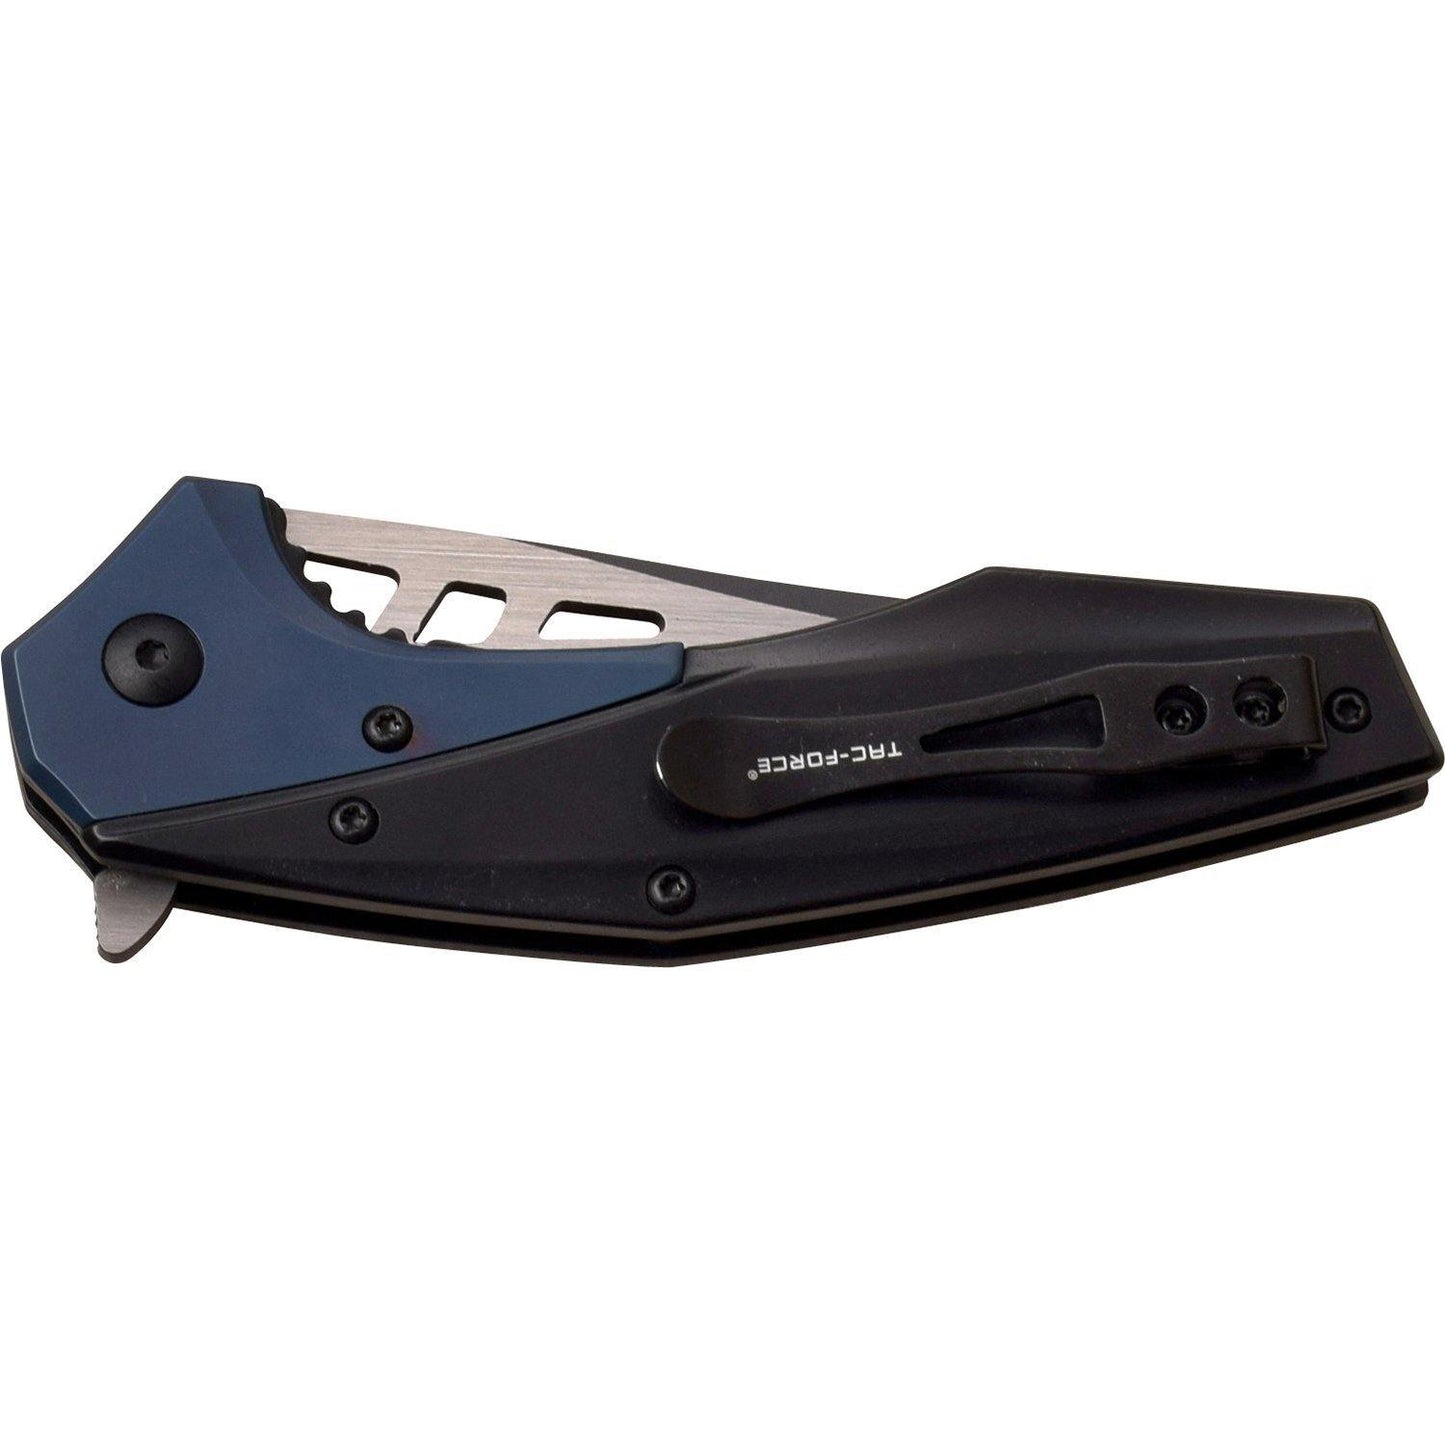 Tac-Force Persian Fine Edge Blade Folding Knife - 7.75 Inches Overall #tf-977Bl - Xhunter New Zealand